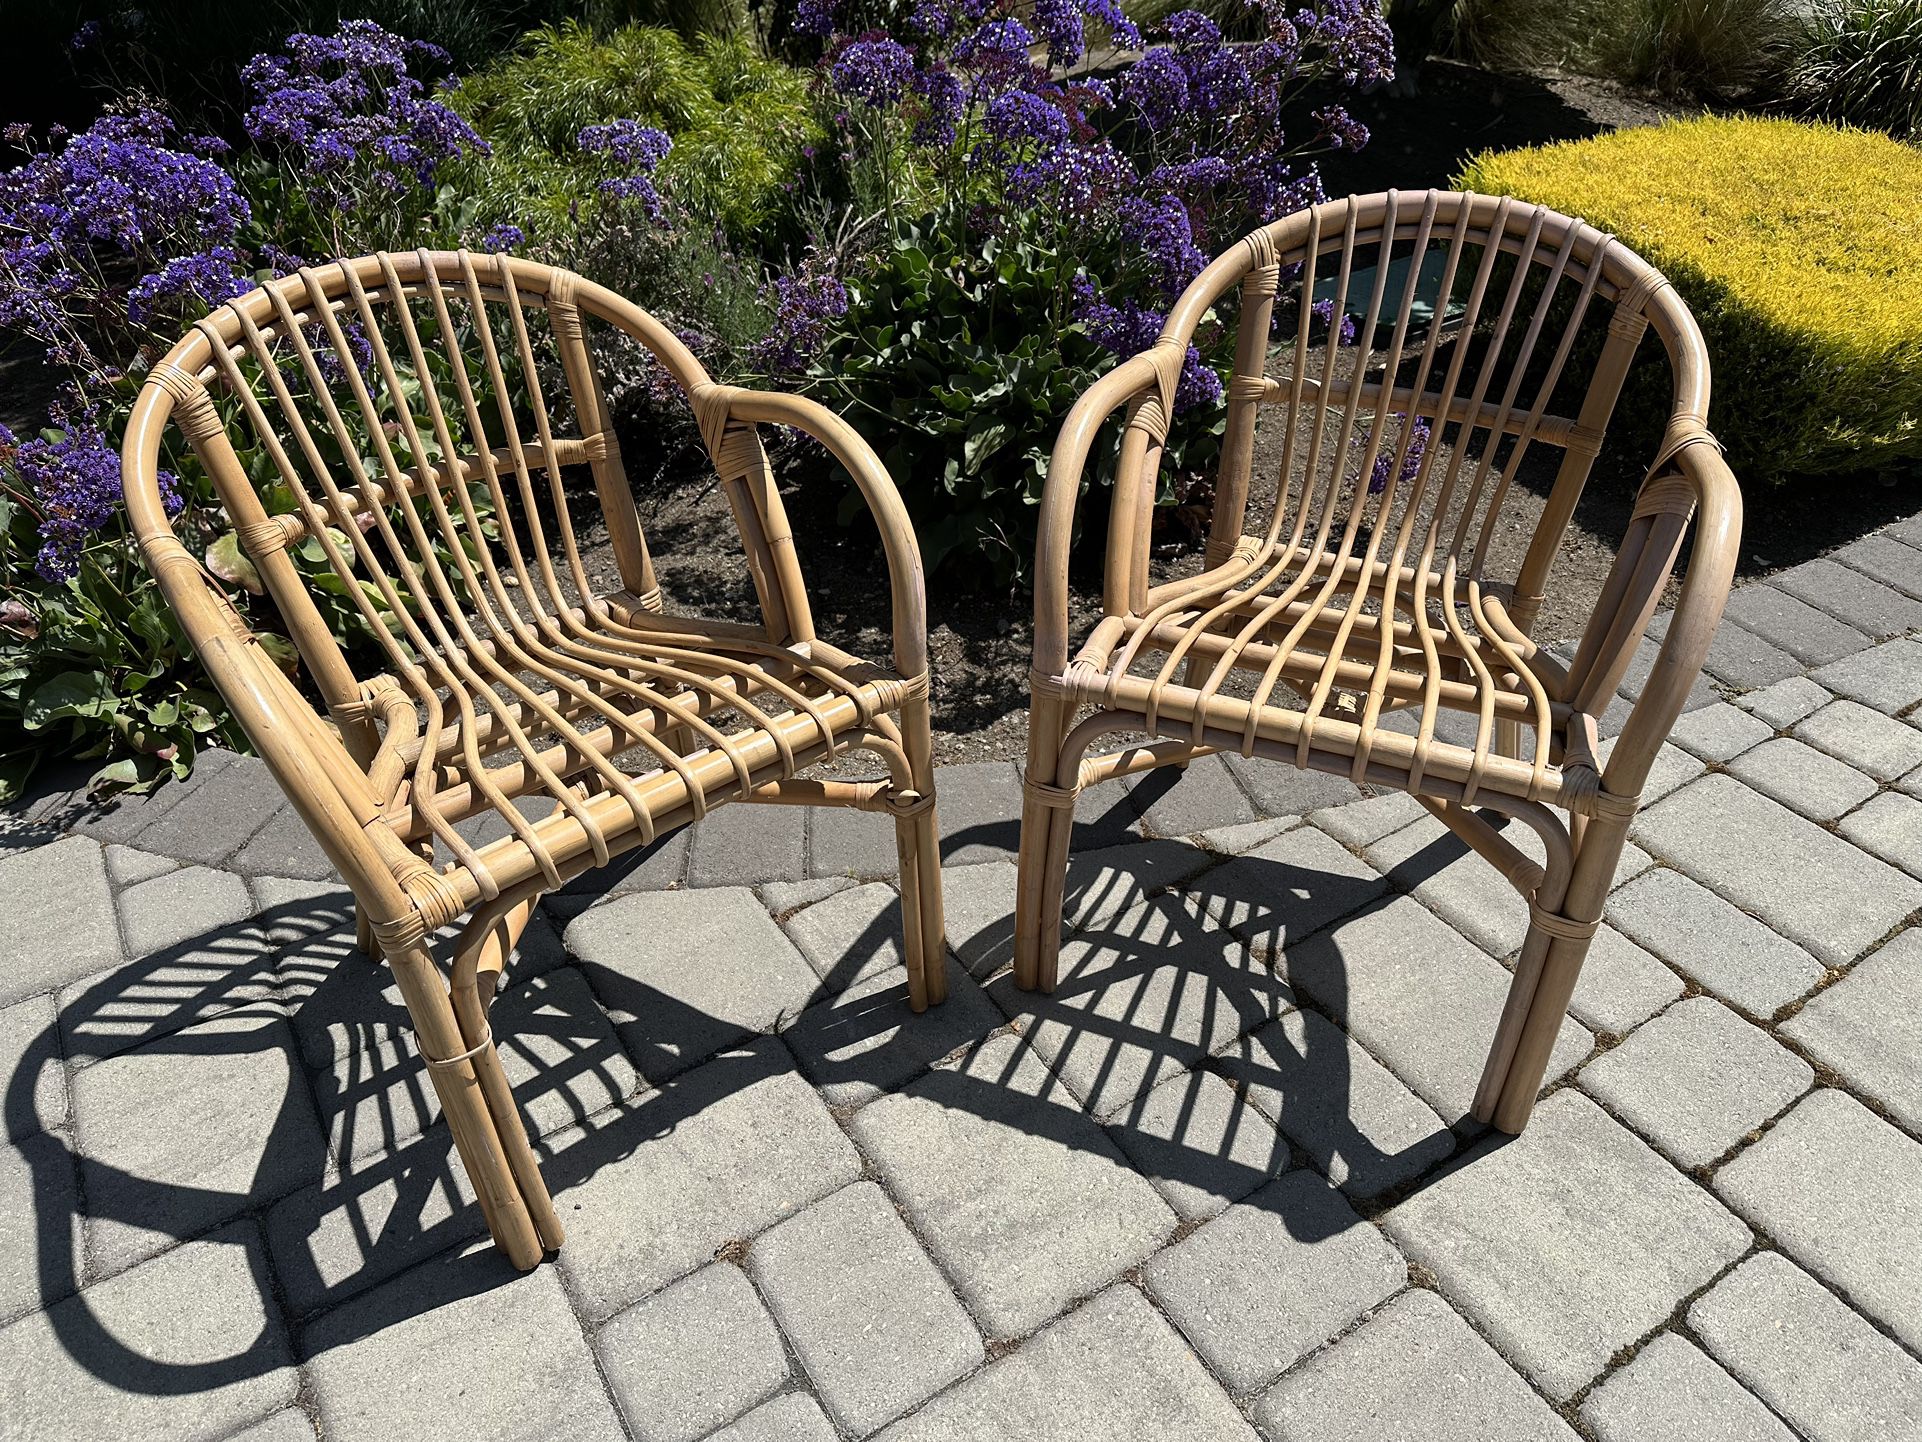 Two Bamboo Chairs - Good Condition